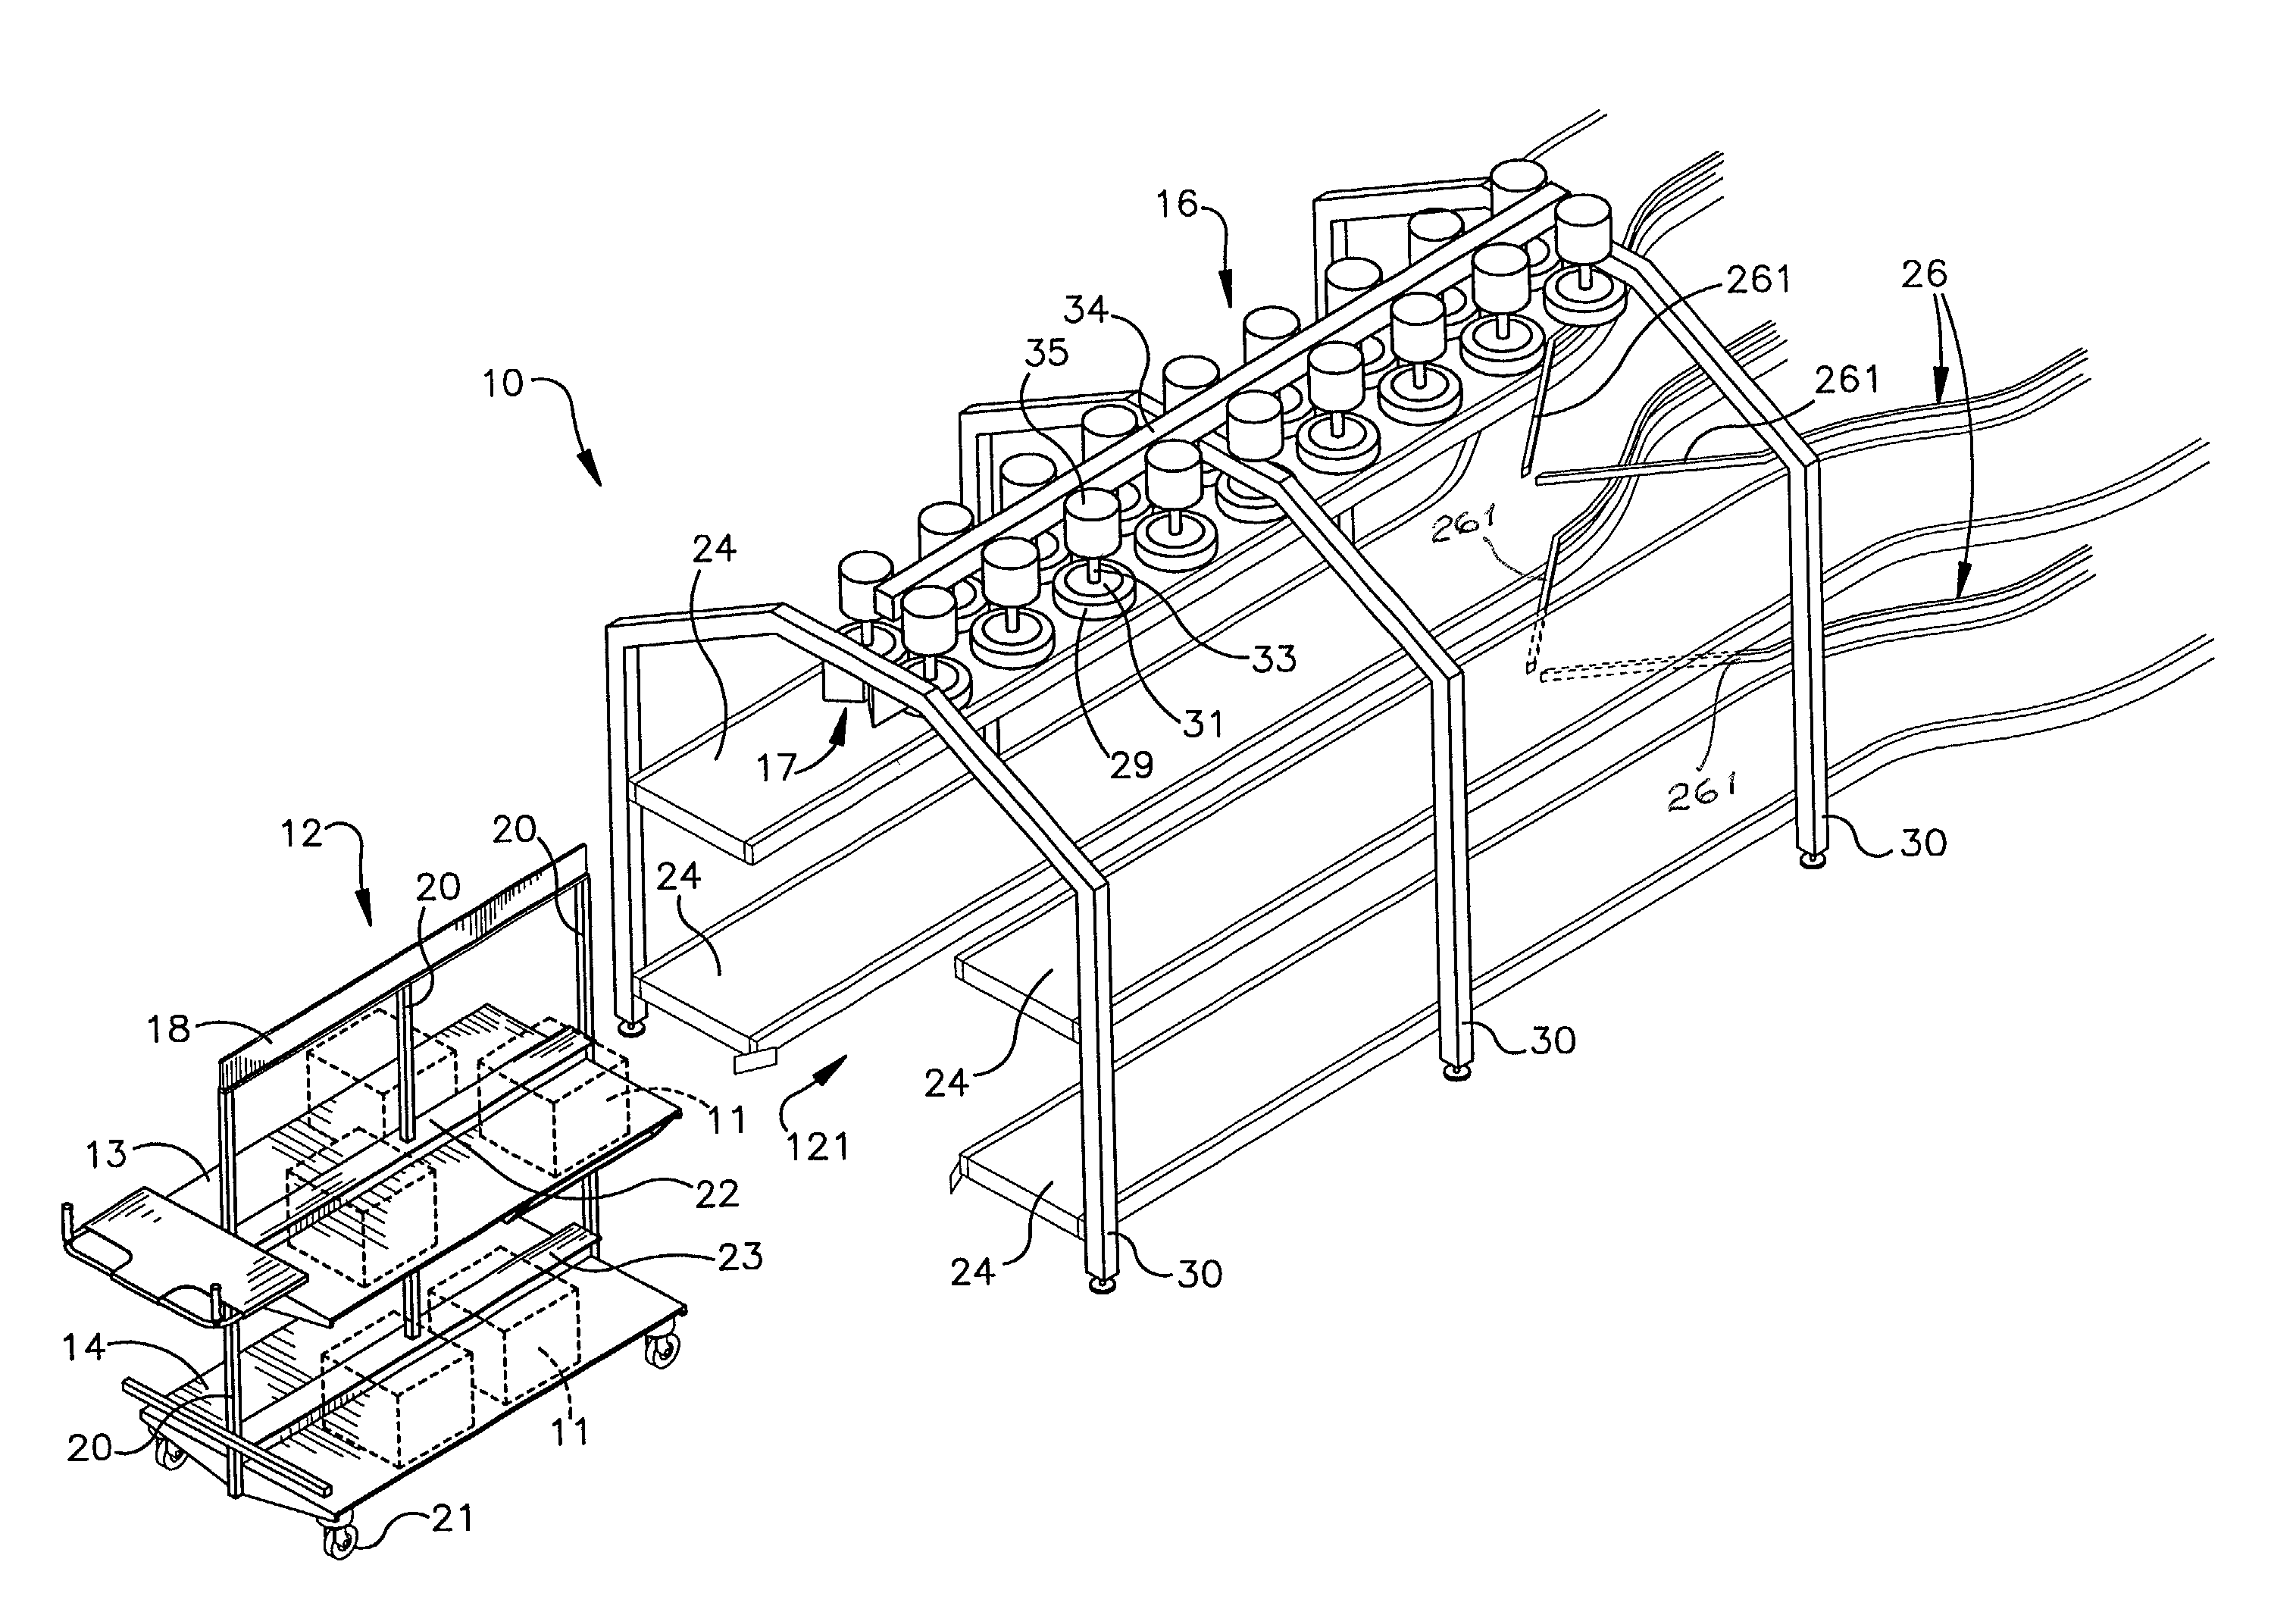 Automated cart unloading/conveyor system